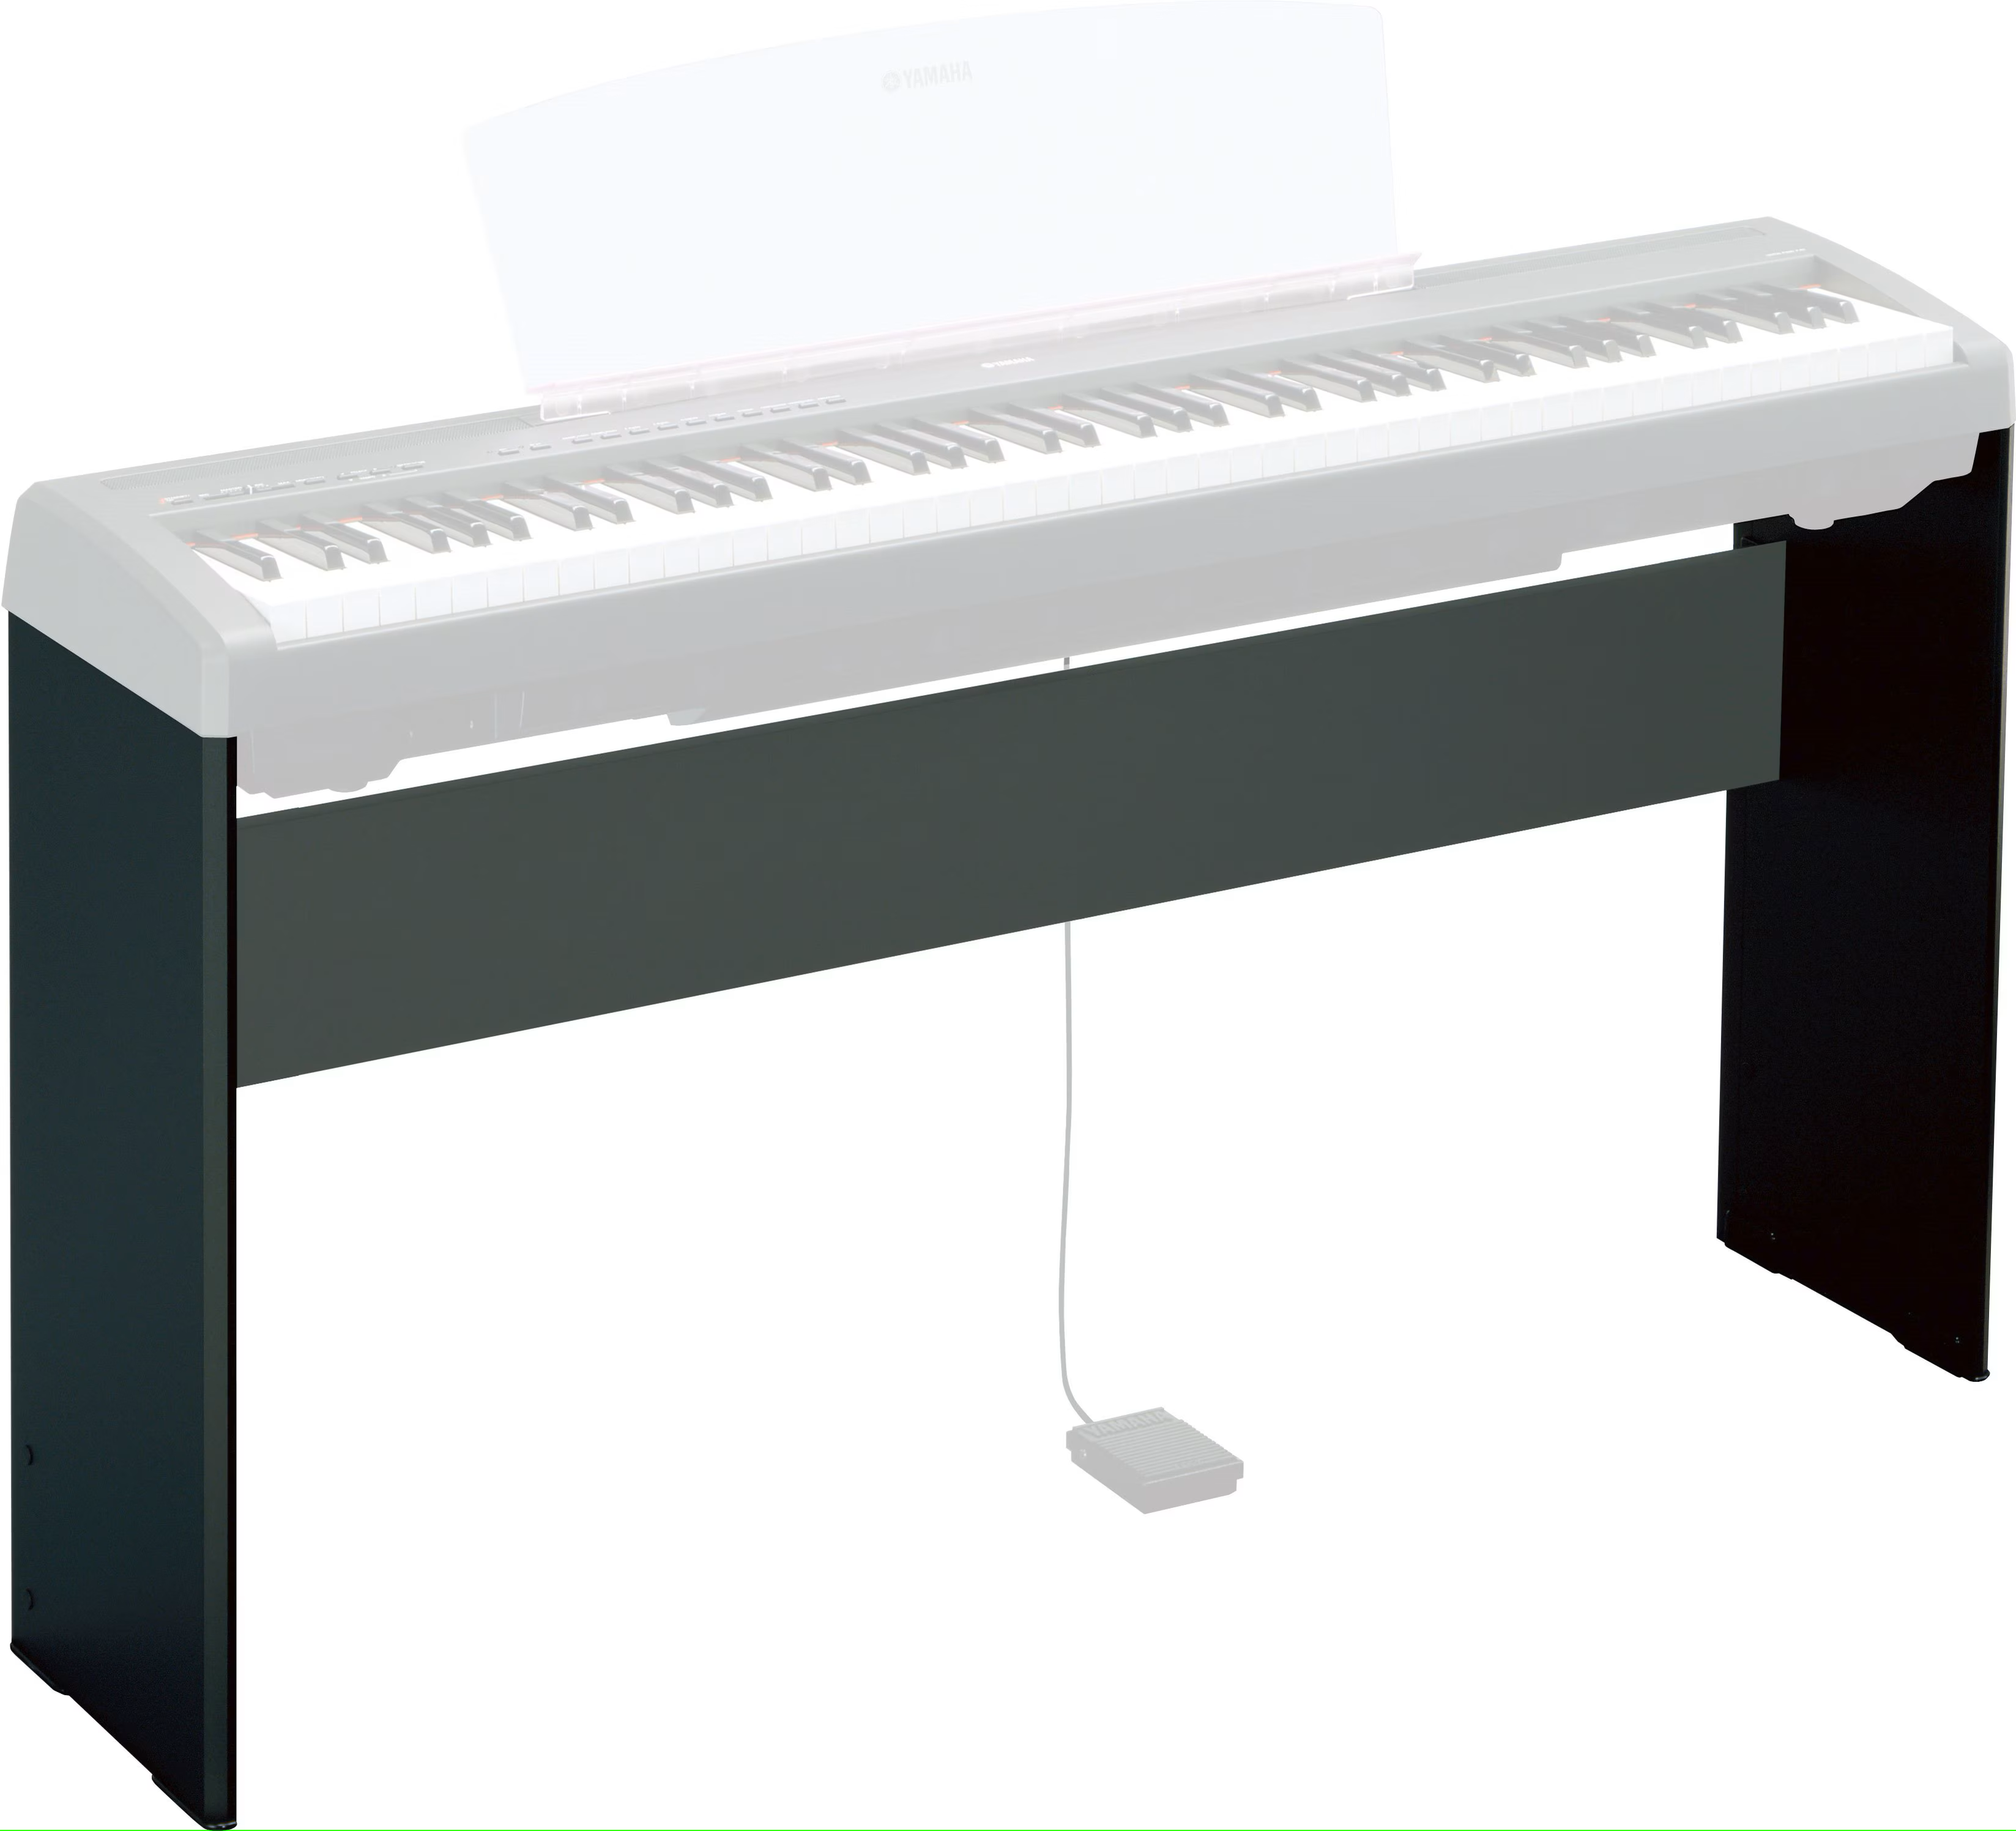 Yamaha L-85 Stand for P-series Digital Piano